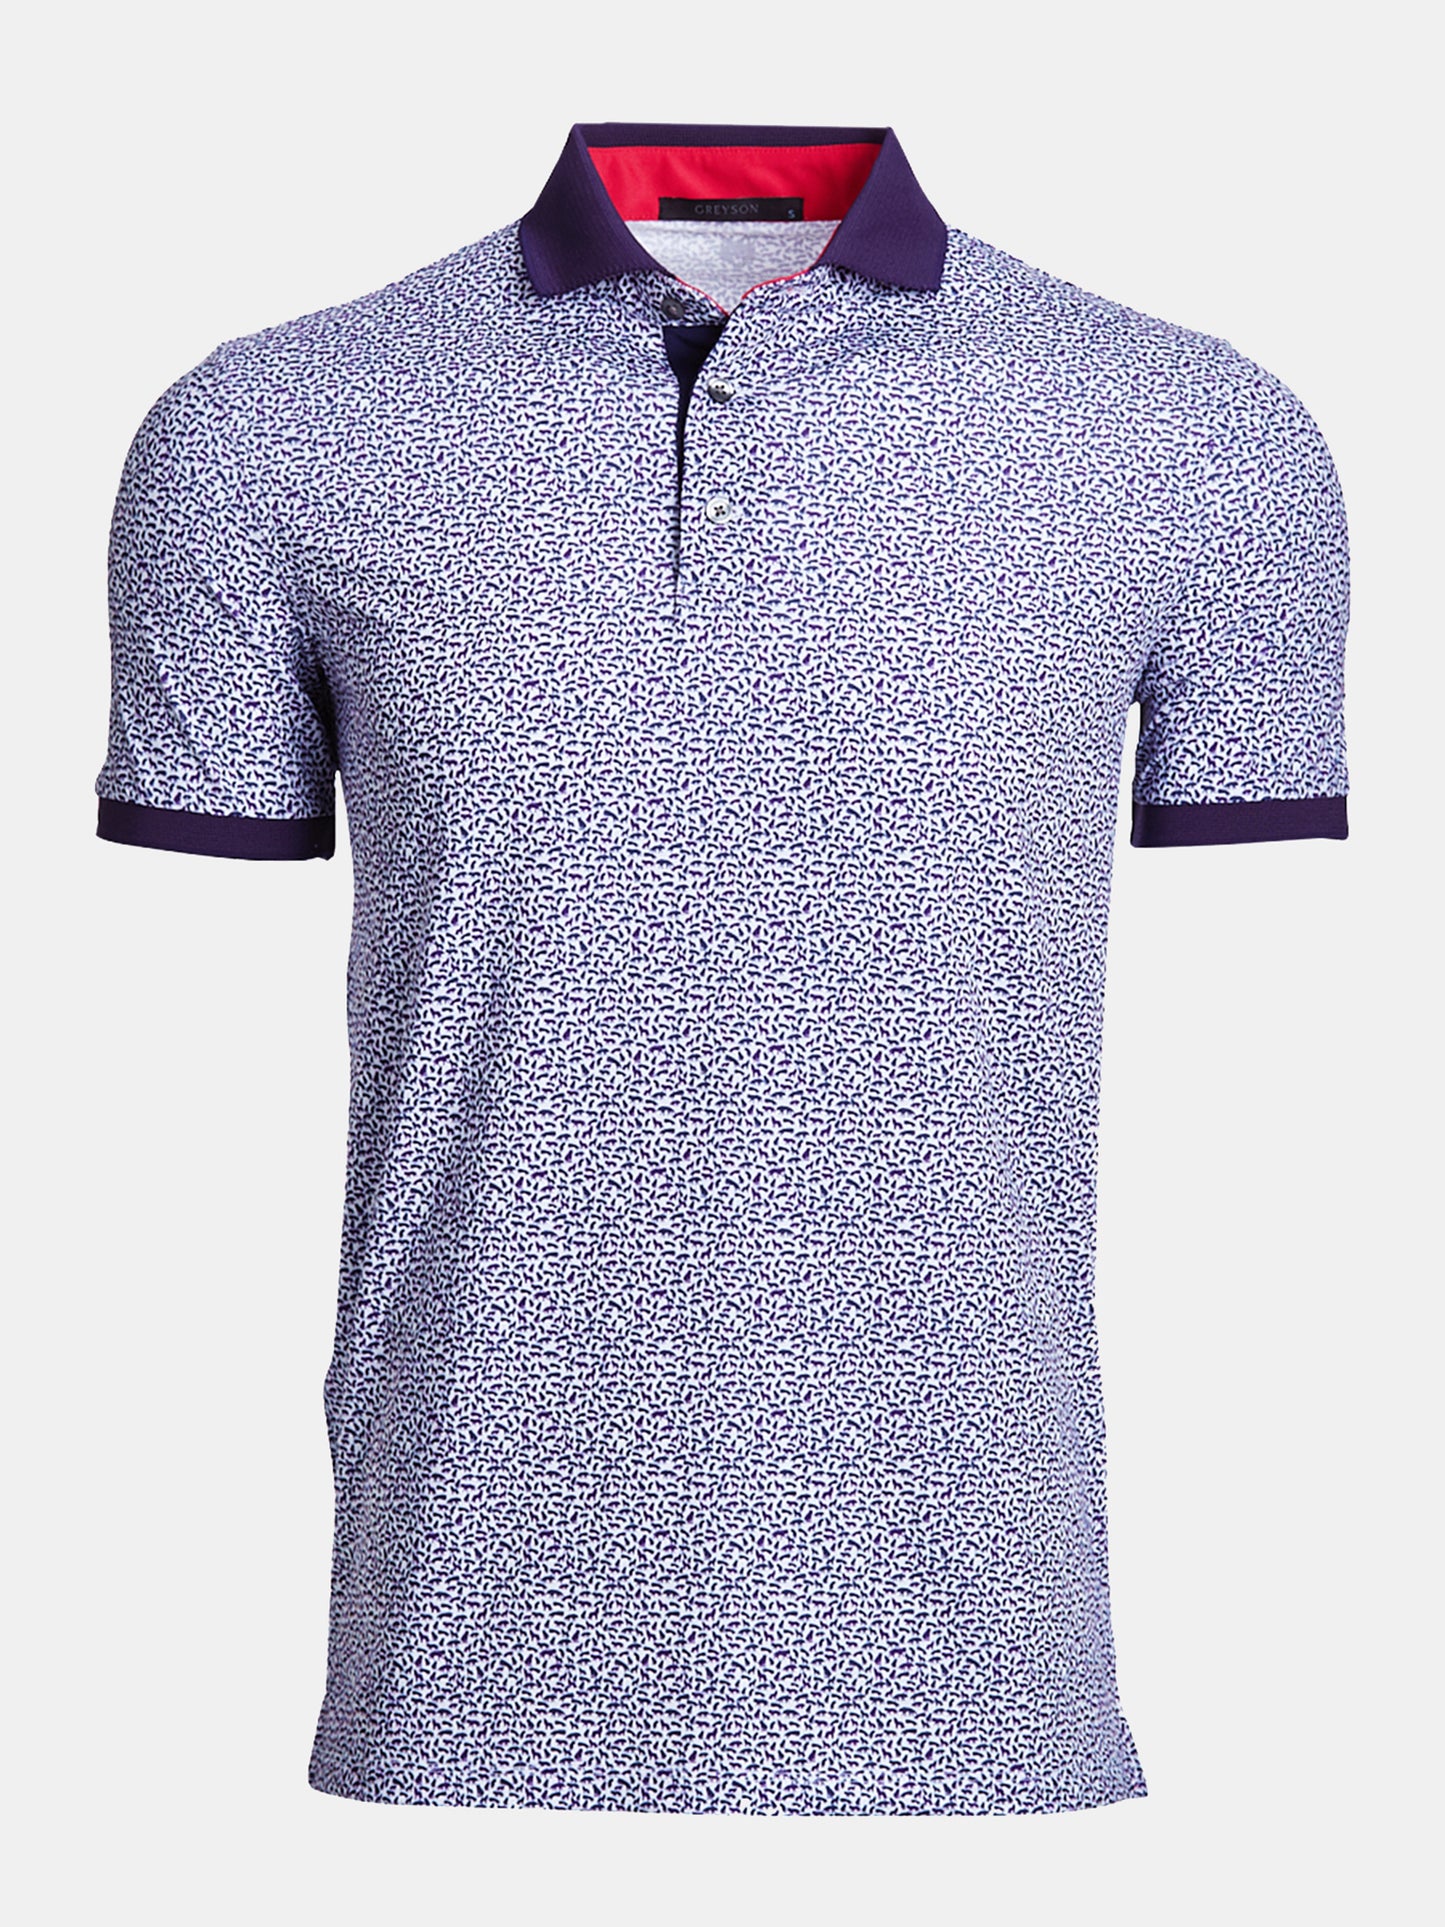 Greyson Wolfpack Polo